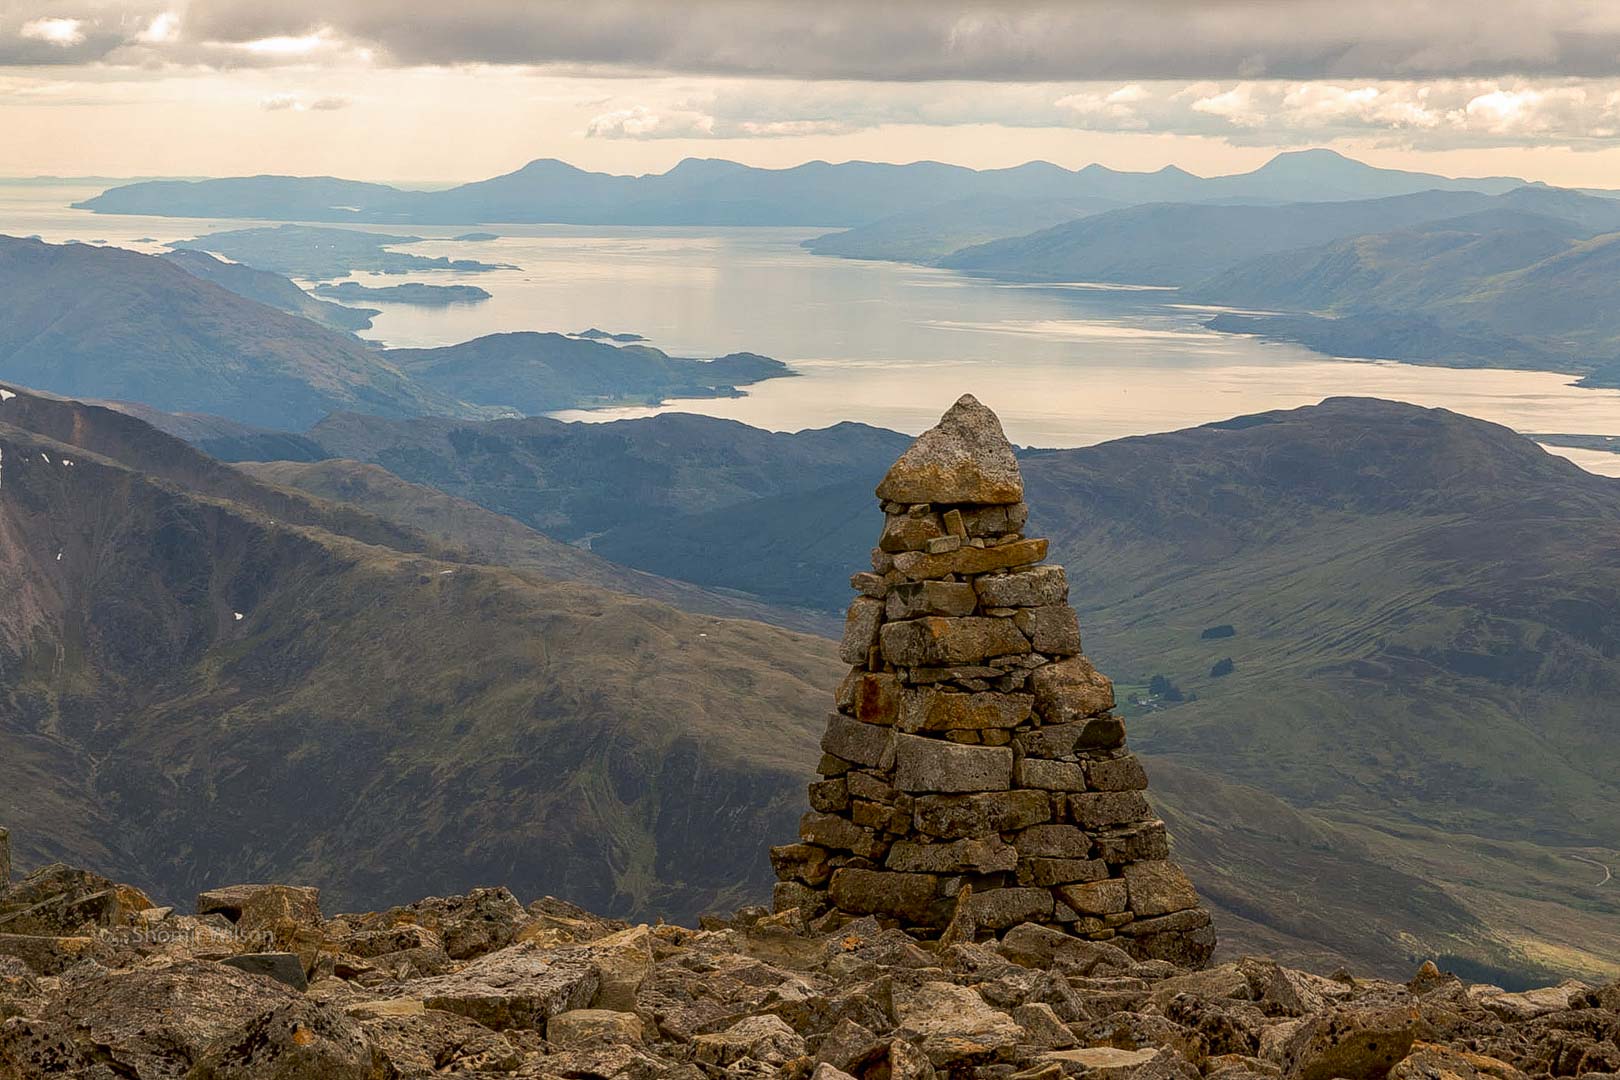 at a high altitude, a cairn of stones surrounded by stones on the ground, with mountains and a sea inlet behind